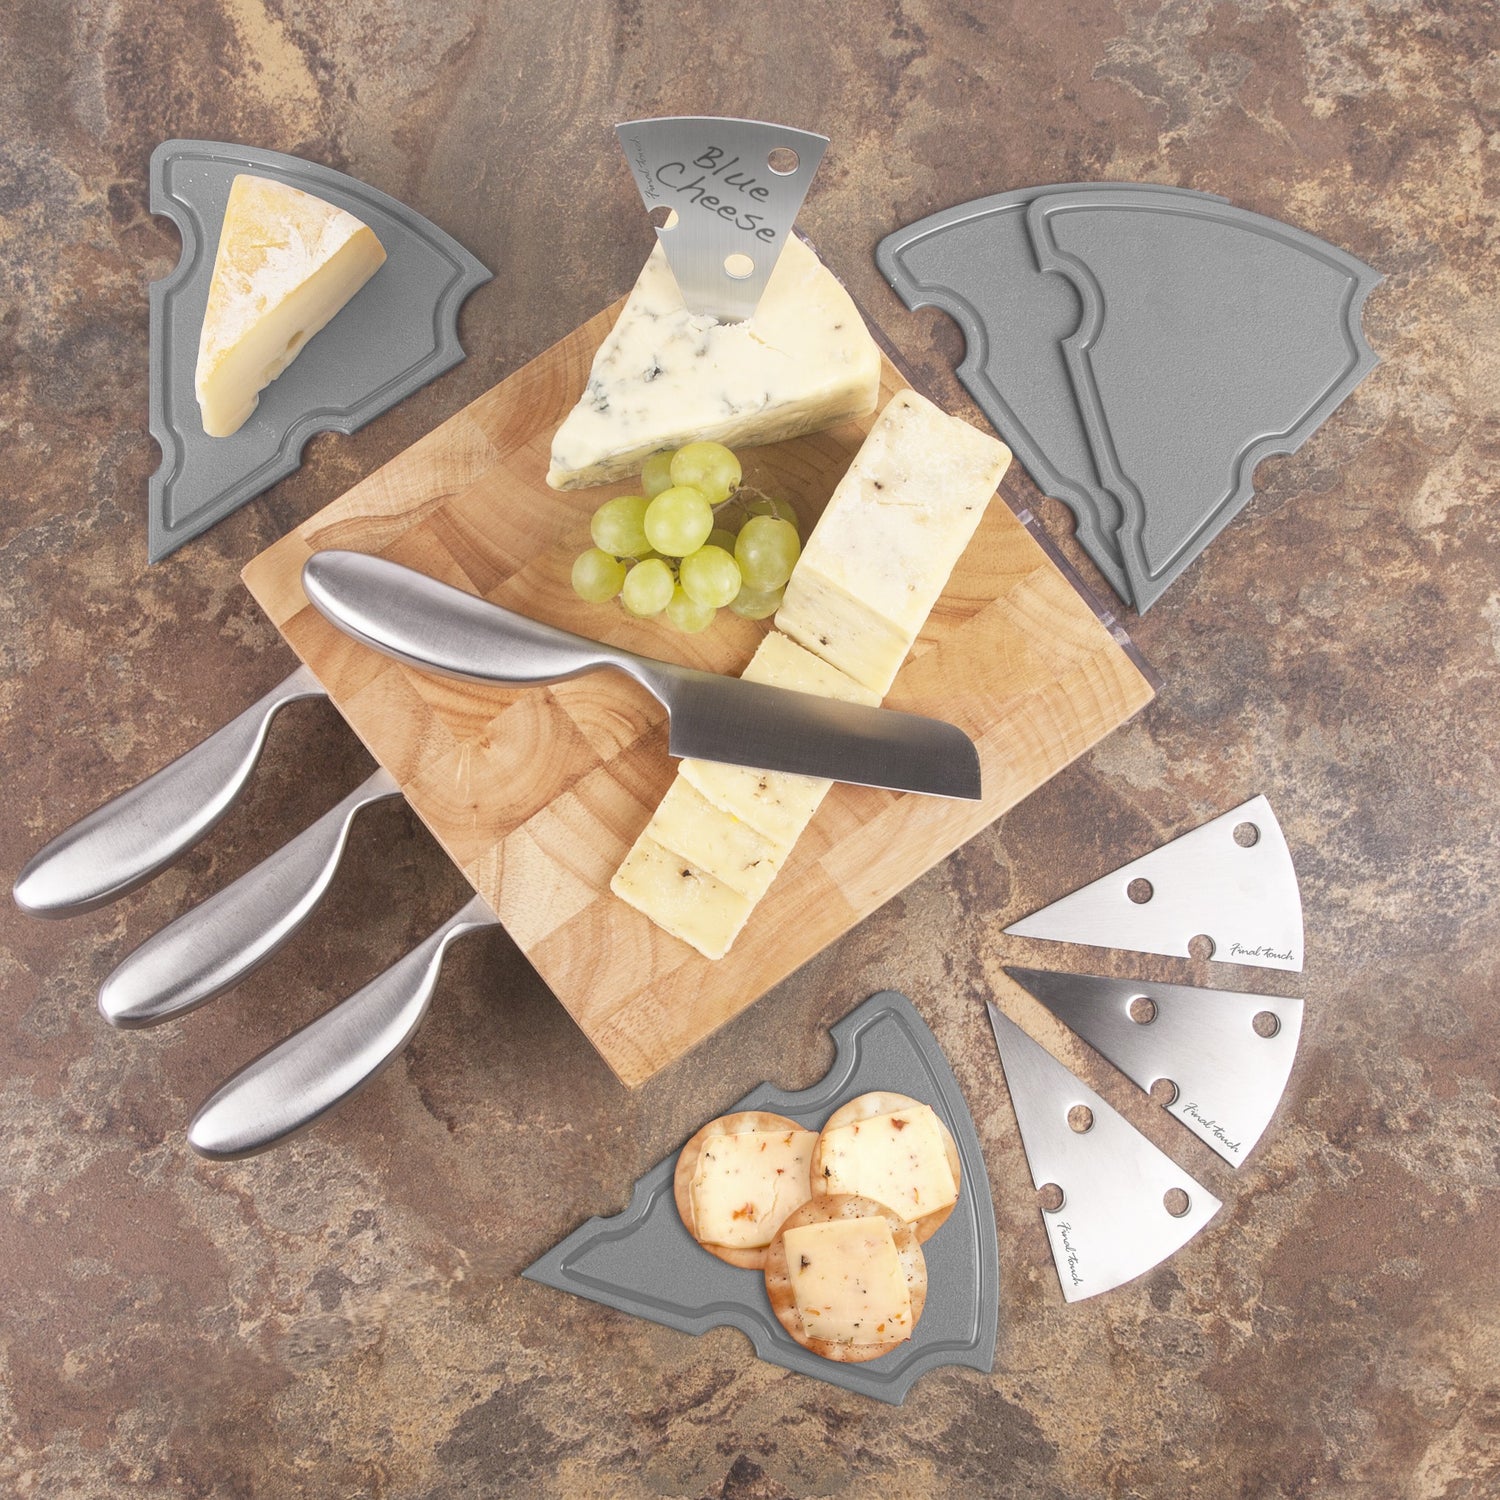 Stainless Steel Cheese Station